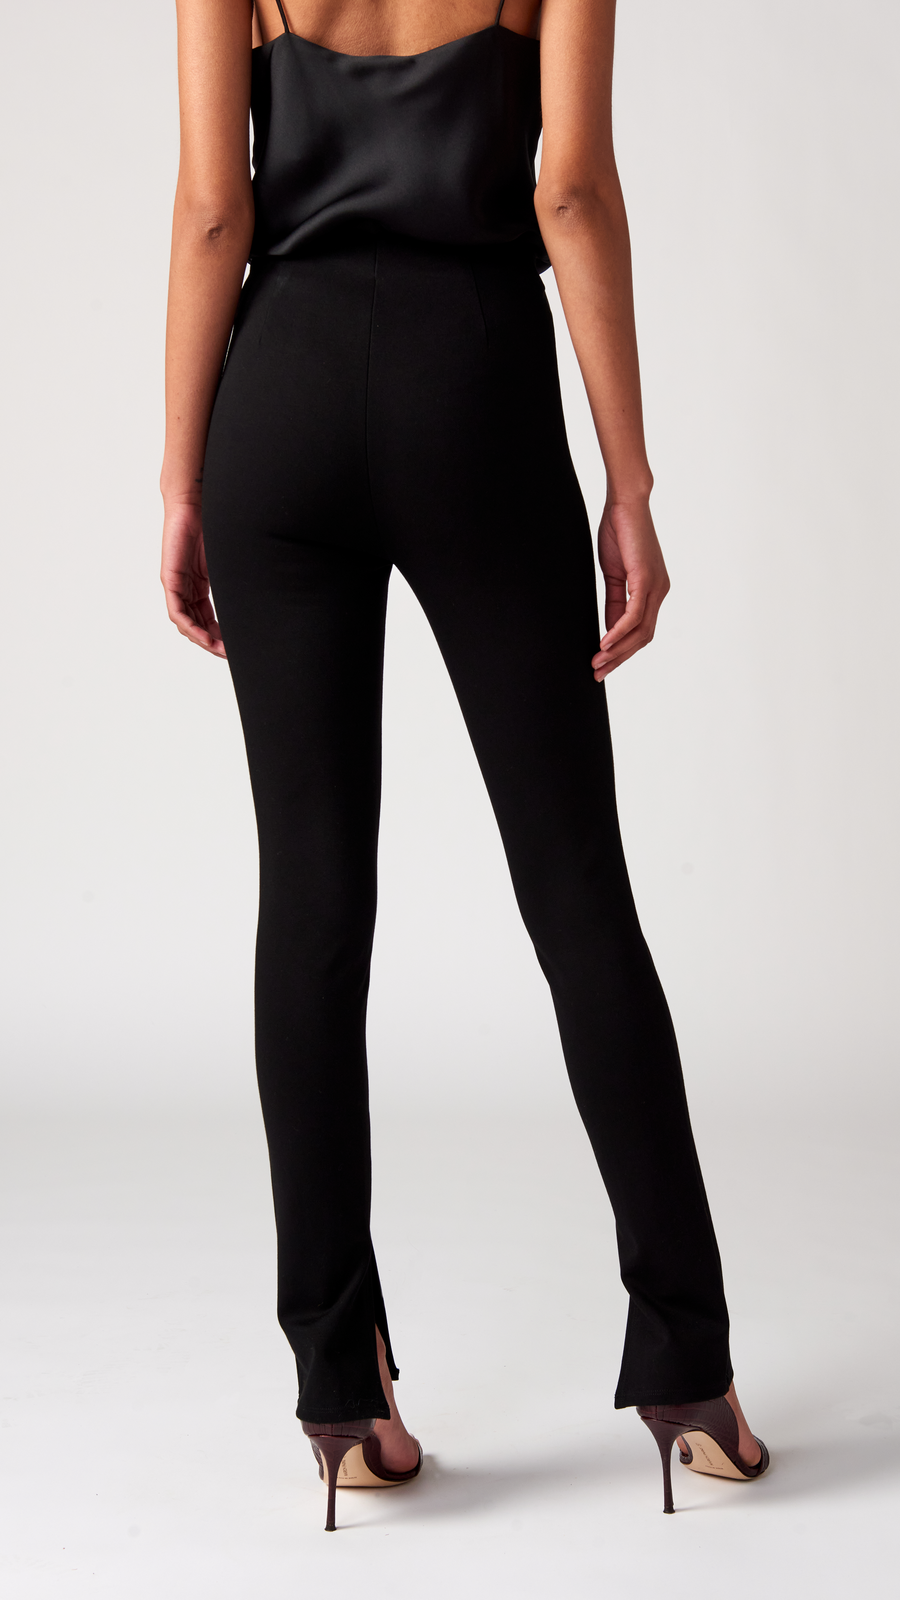 The back view of the black high-waisted pants on a woman.